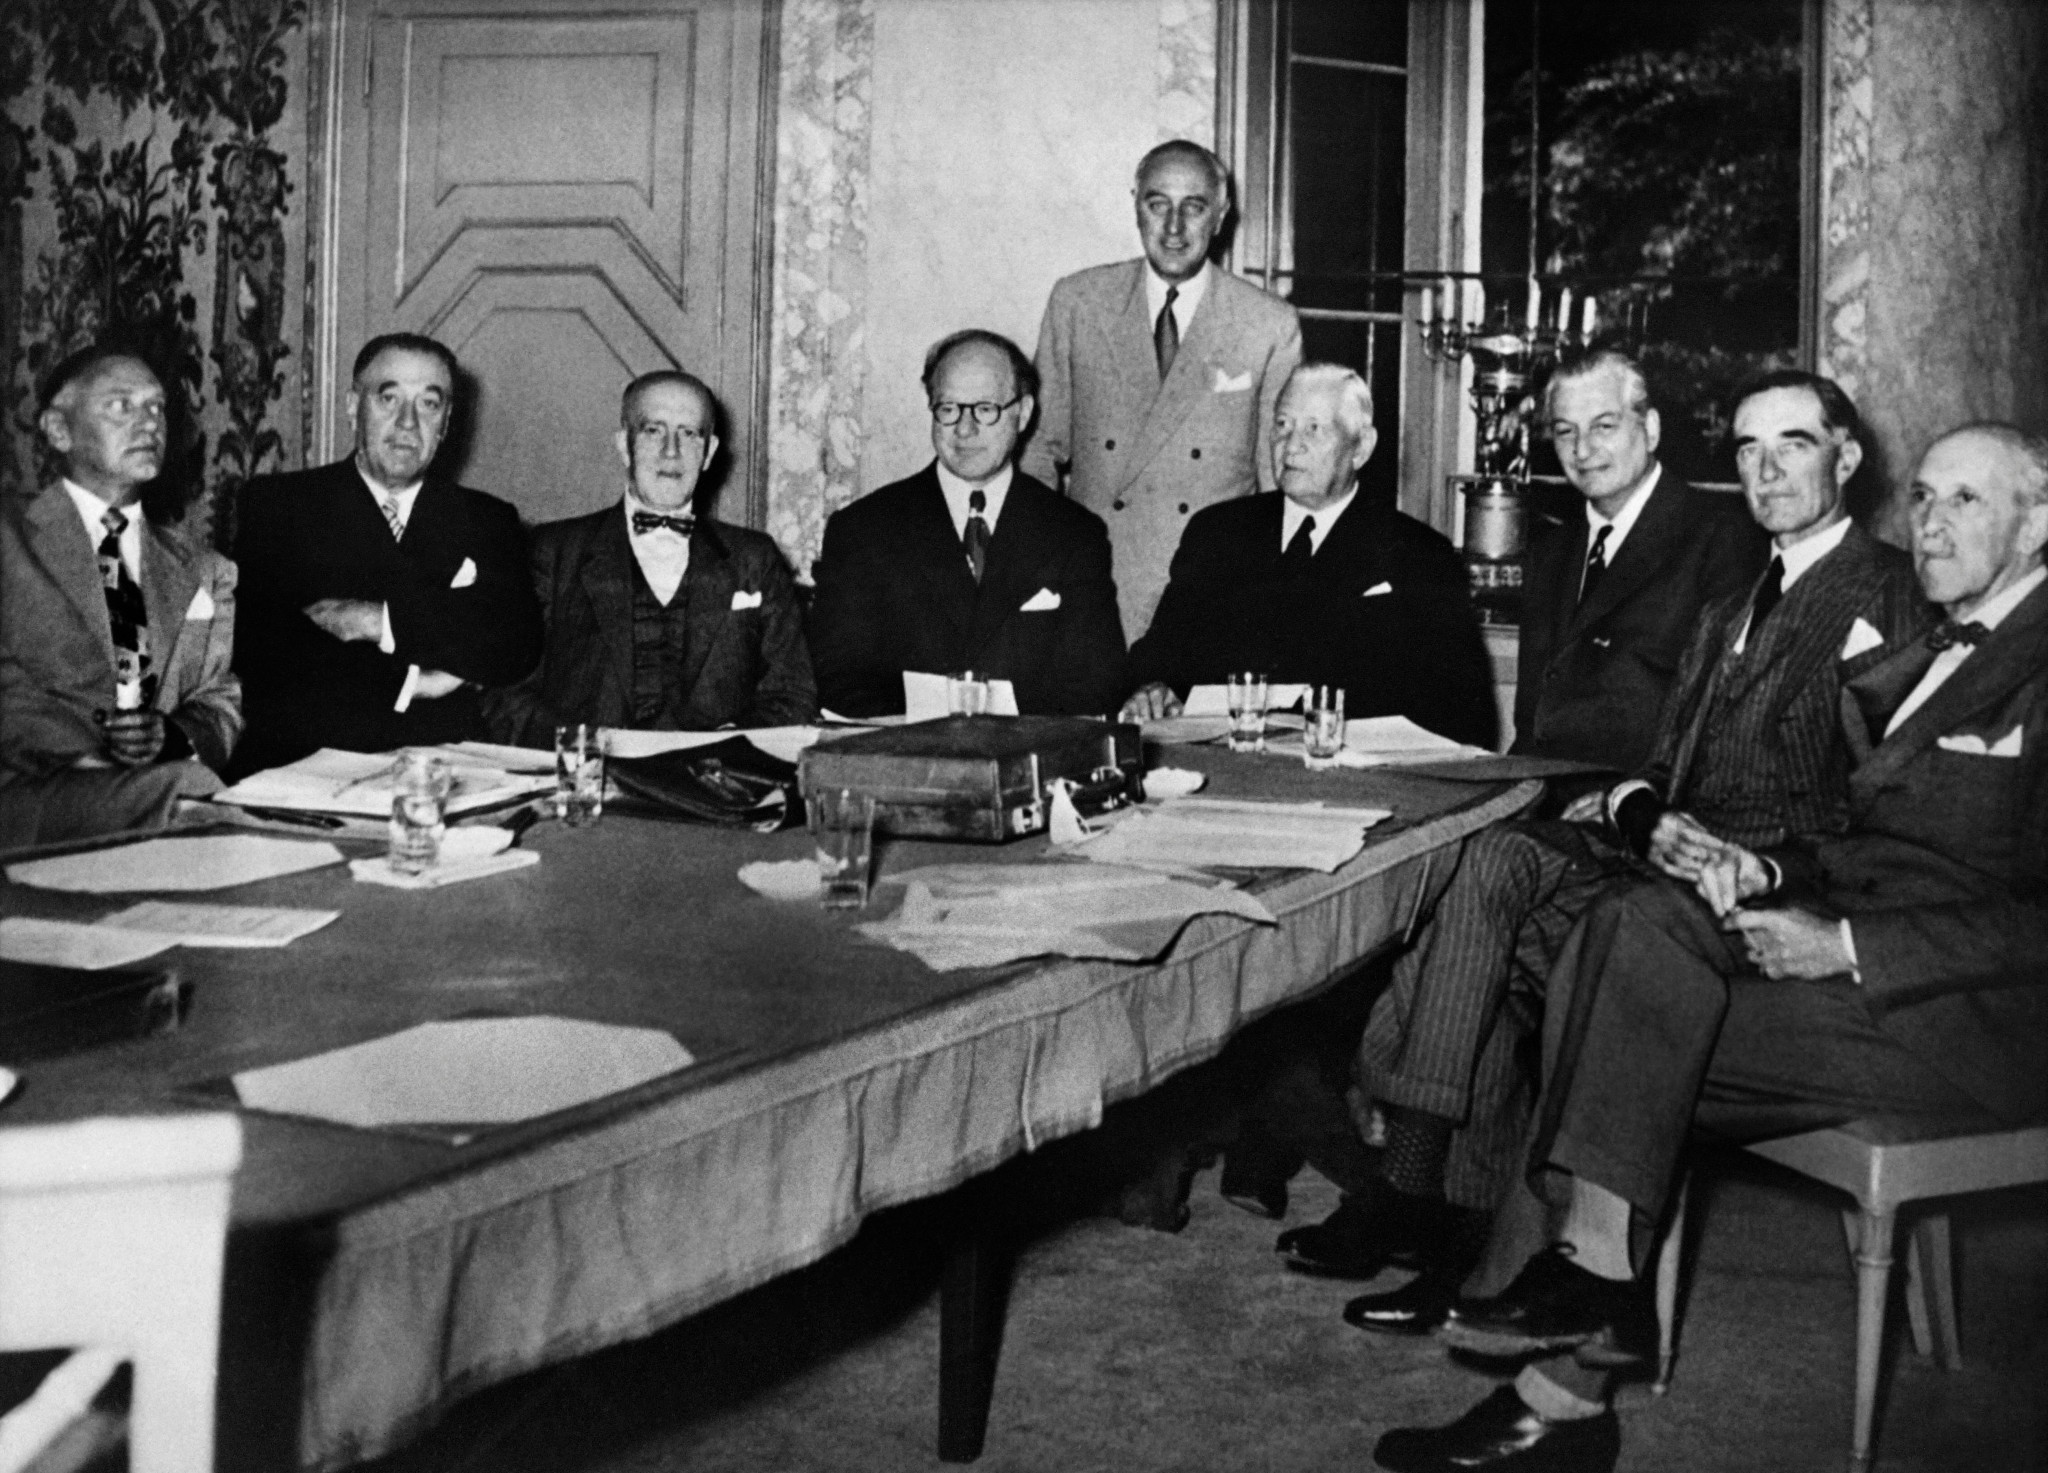 IOC President Sigfrid Edstrom, standing, at a meeting in 1950, the year the Saarland was given Olympic recognition ©Getty Images